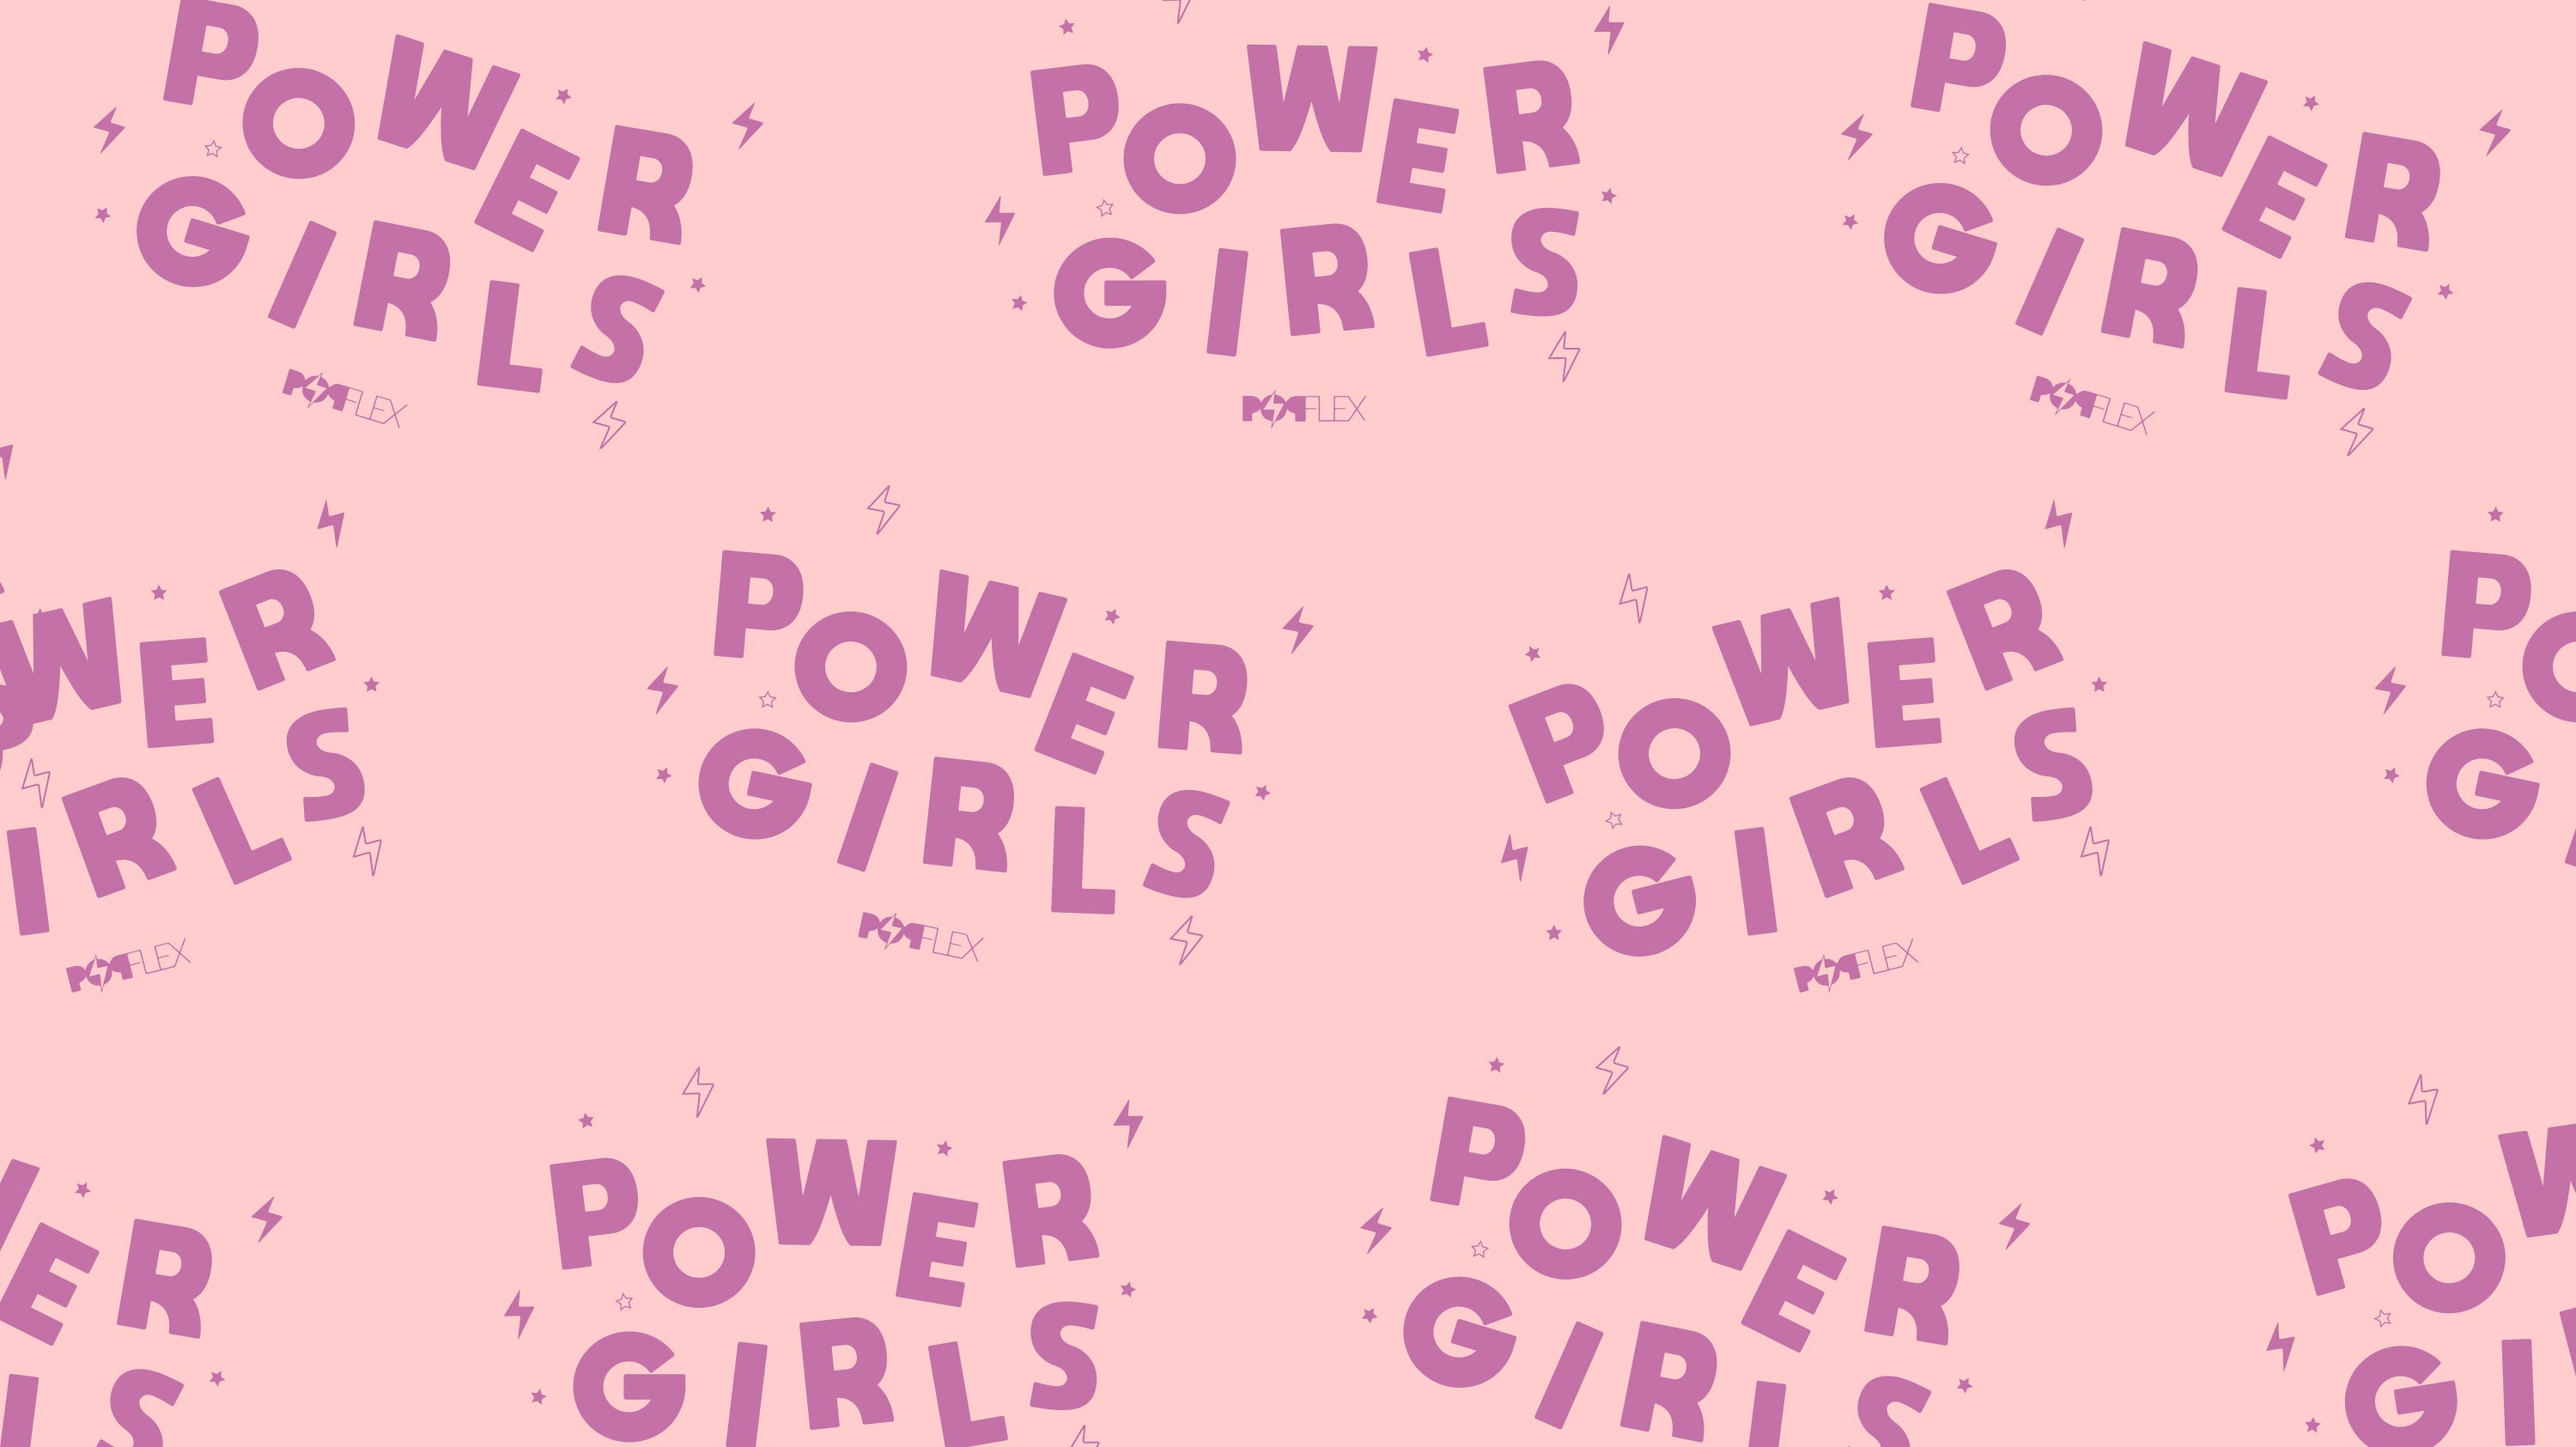 We're on the search for our 2019 POWERGIRLS.